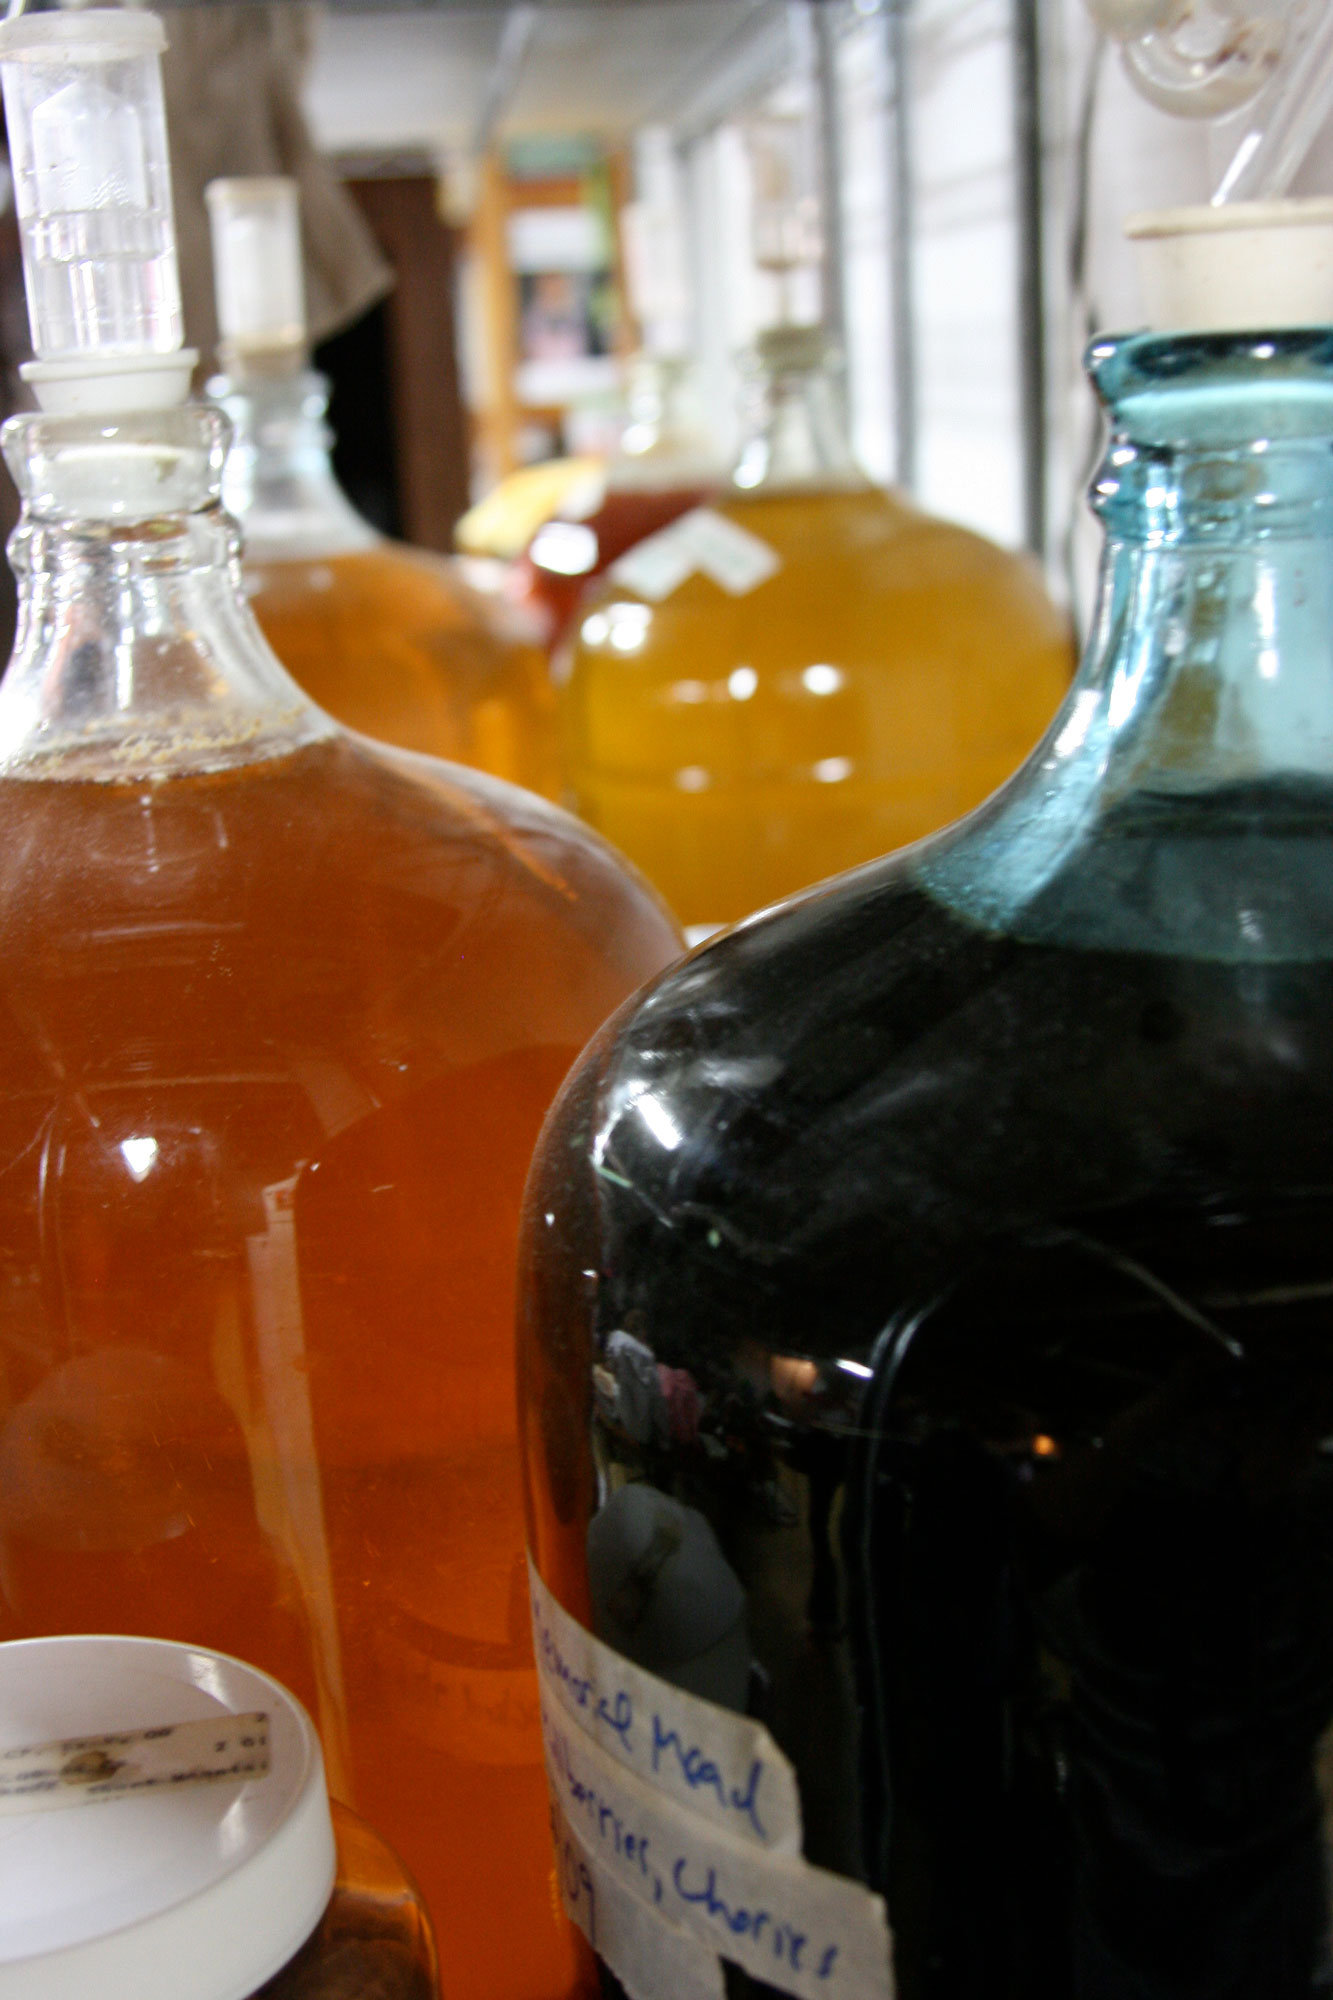 Carboys of fermenting mead